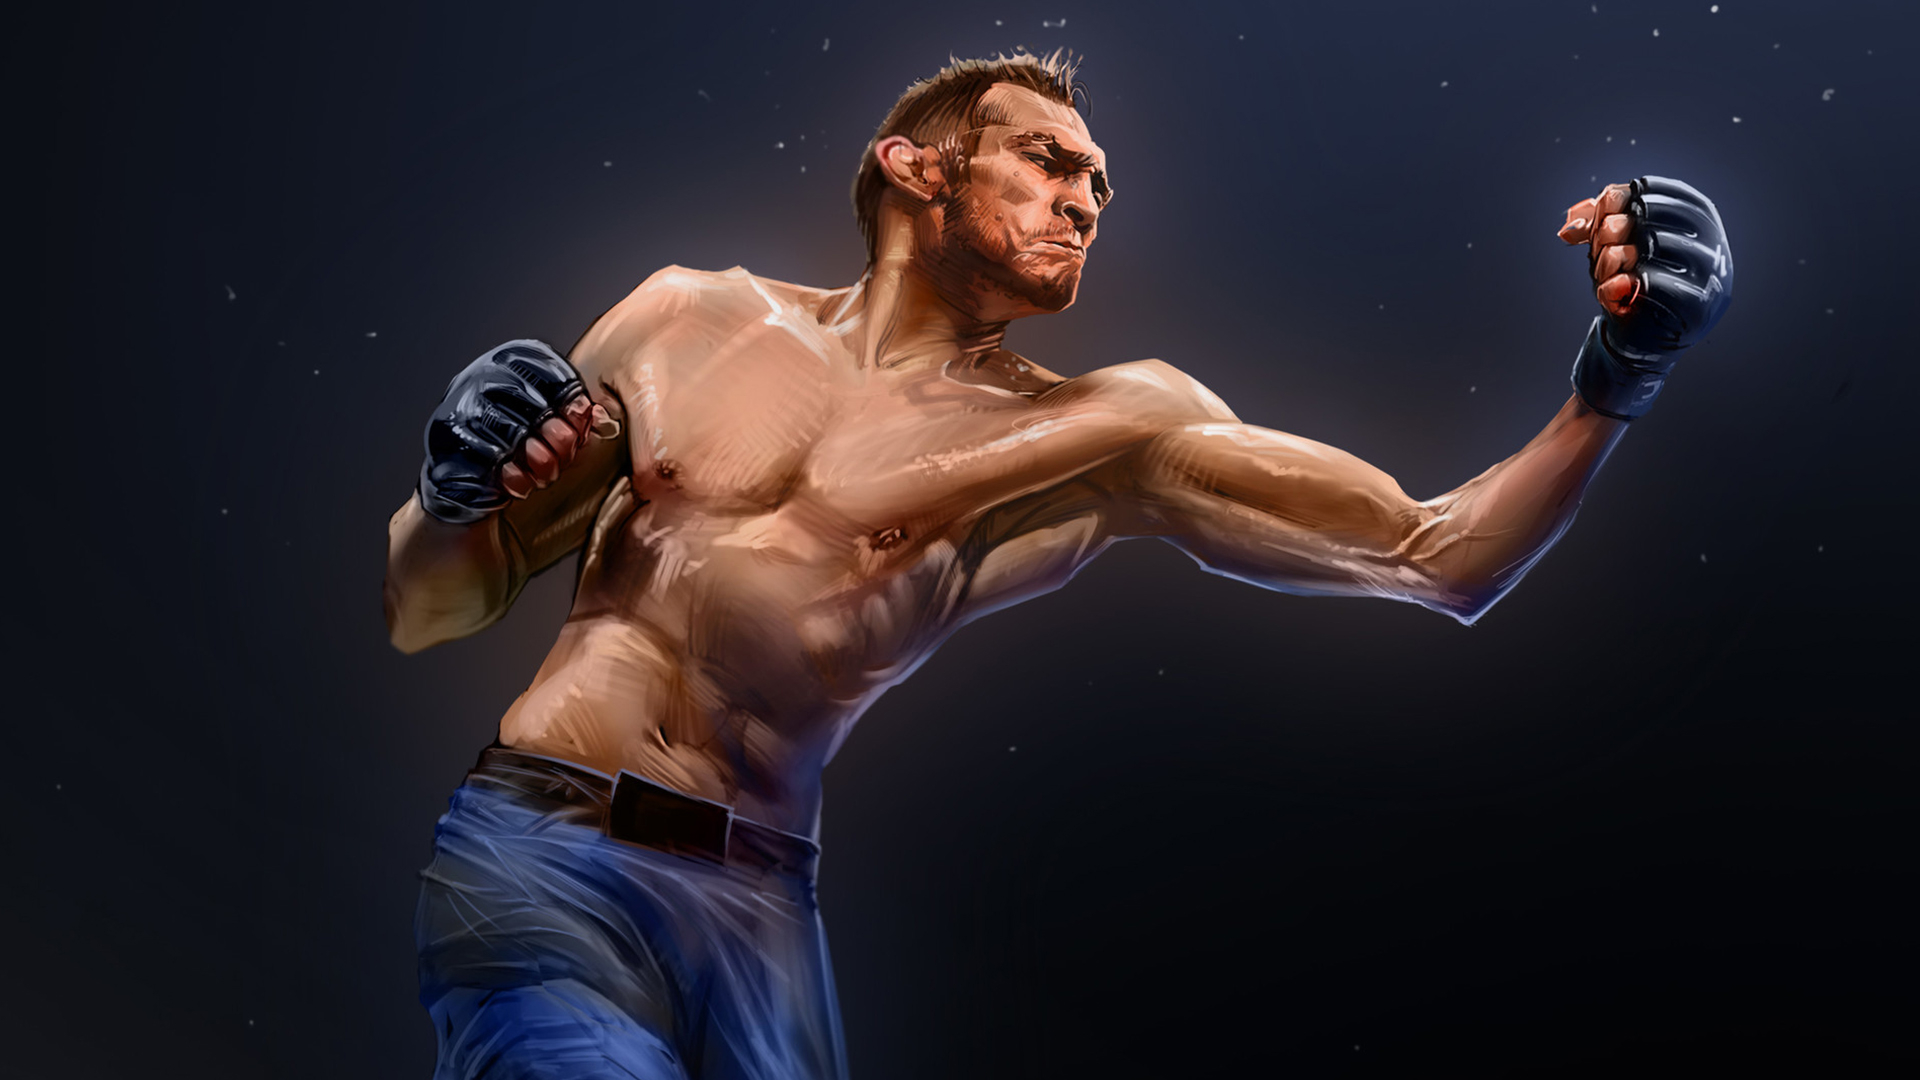 1920x1080 10+ UFC HD Wallpapers and Backgrounds